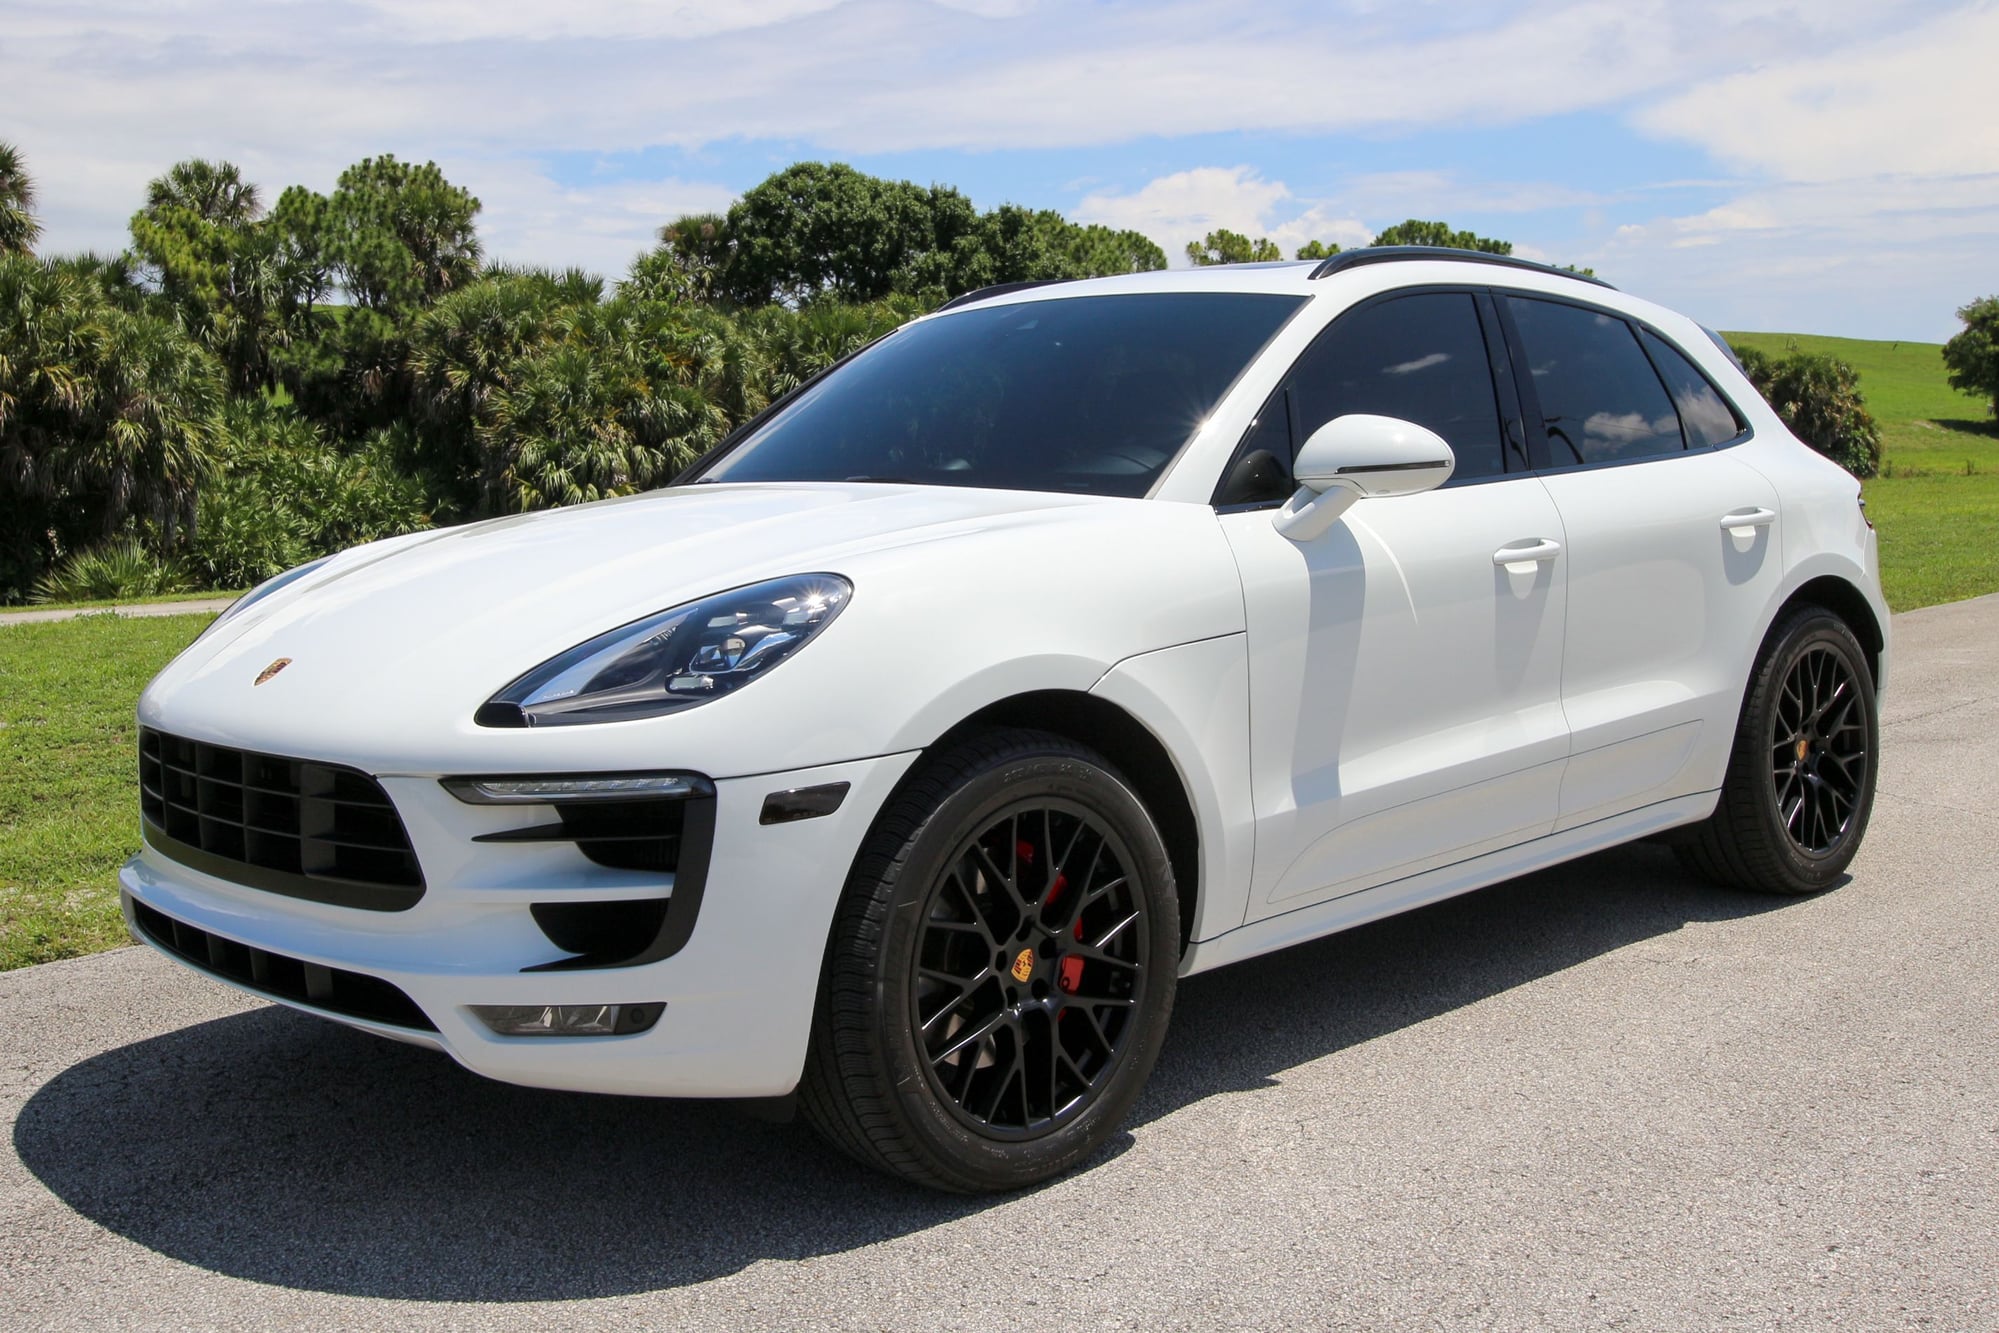 2017 Porsche Macan - 2017 Porshce Macan GTS w/ 7,406 miles - Used - VIN WP1AG2A53HLB52756 - 7,406 Miles - 6 cyl - AWD - Automatic - SUV - White - Riviera Beach, FL 33407, United States